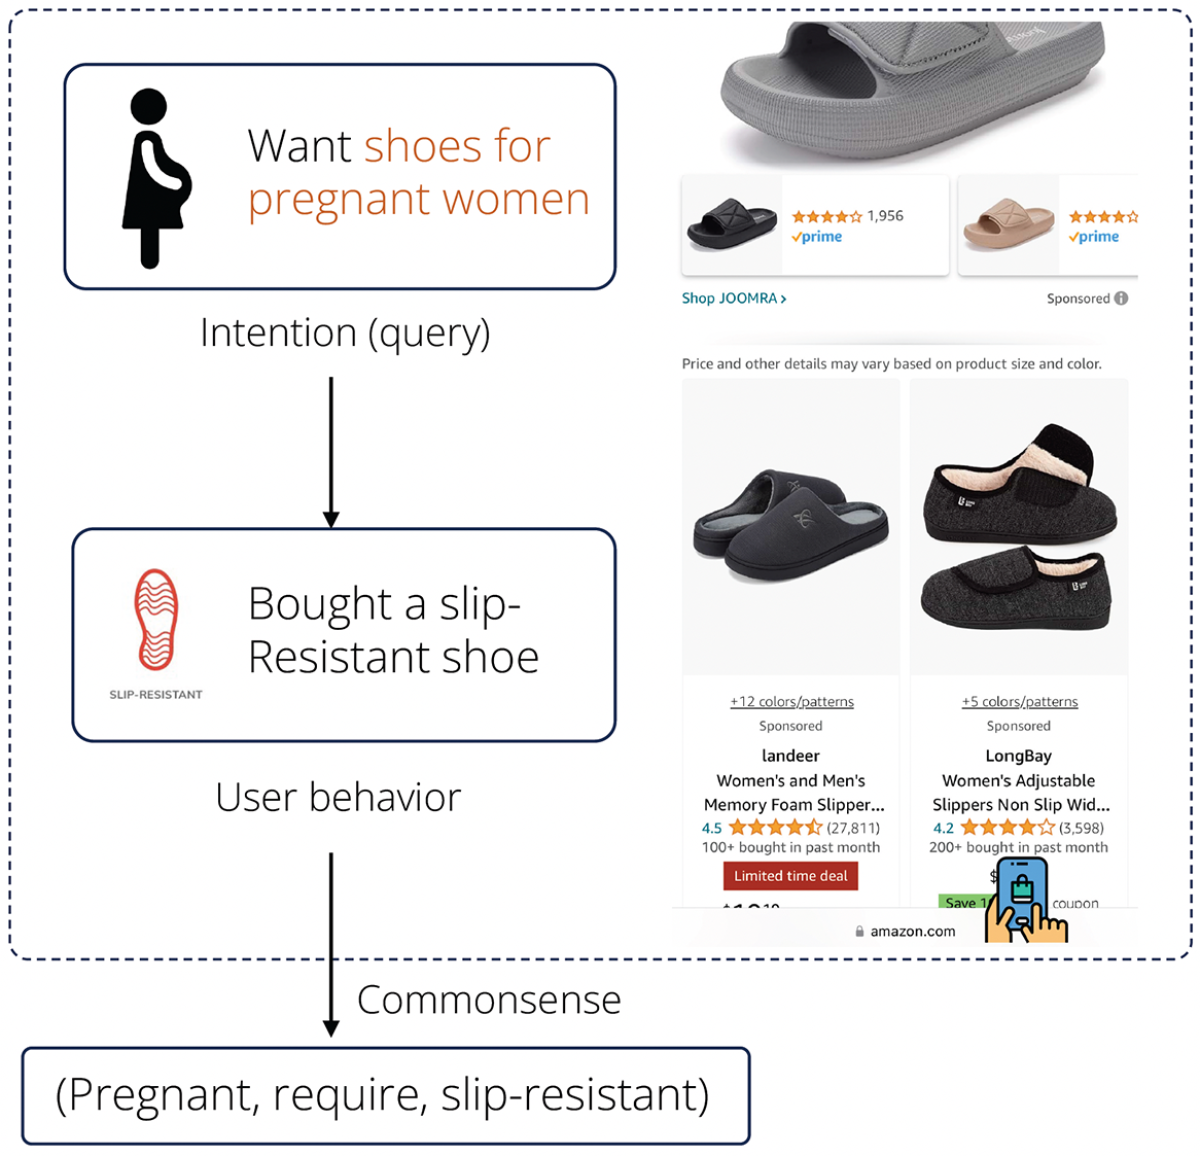 At left is a flow chart that begins with the query "Want shoes for pregnant women", with an arrow connecting it to the action "Bought a slip-resistant shoe", which is in turn connected to the commonsense triple <pregnant, require, slip-resistant>. At right are a selection of product pages for slip-resistant shoes.